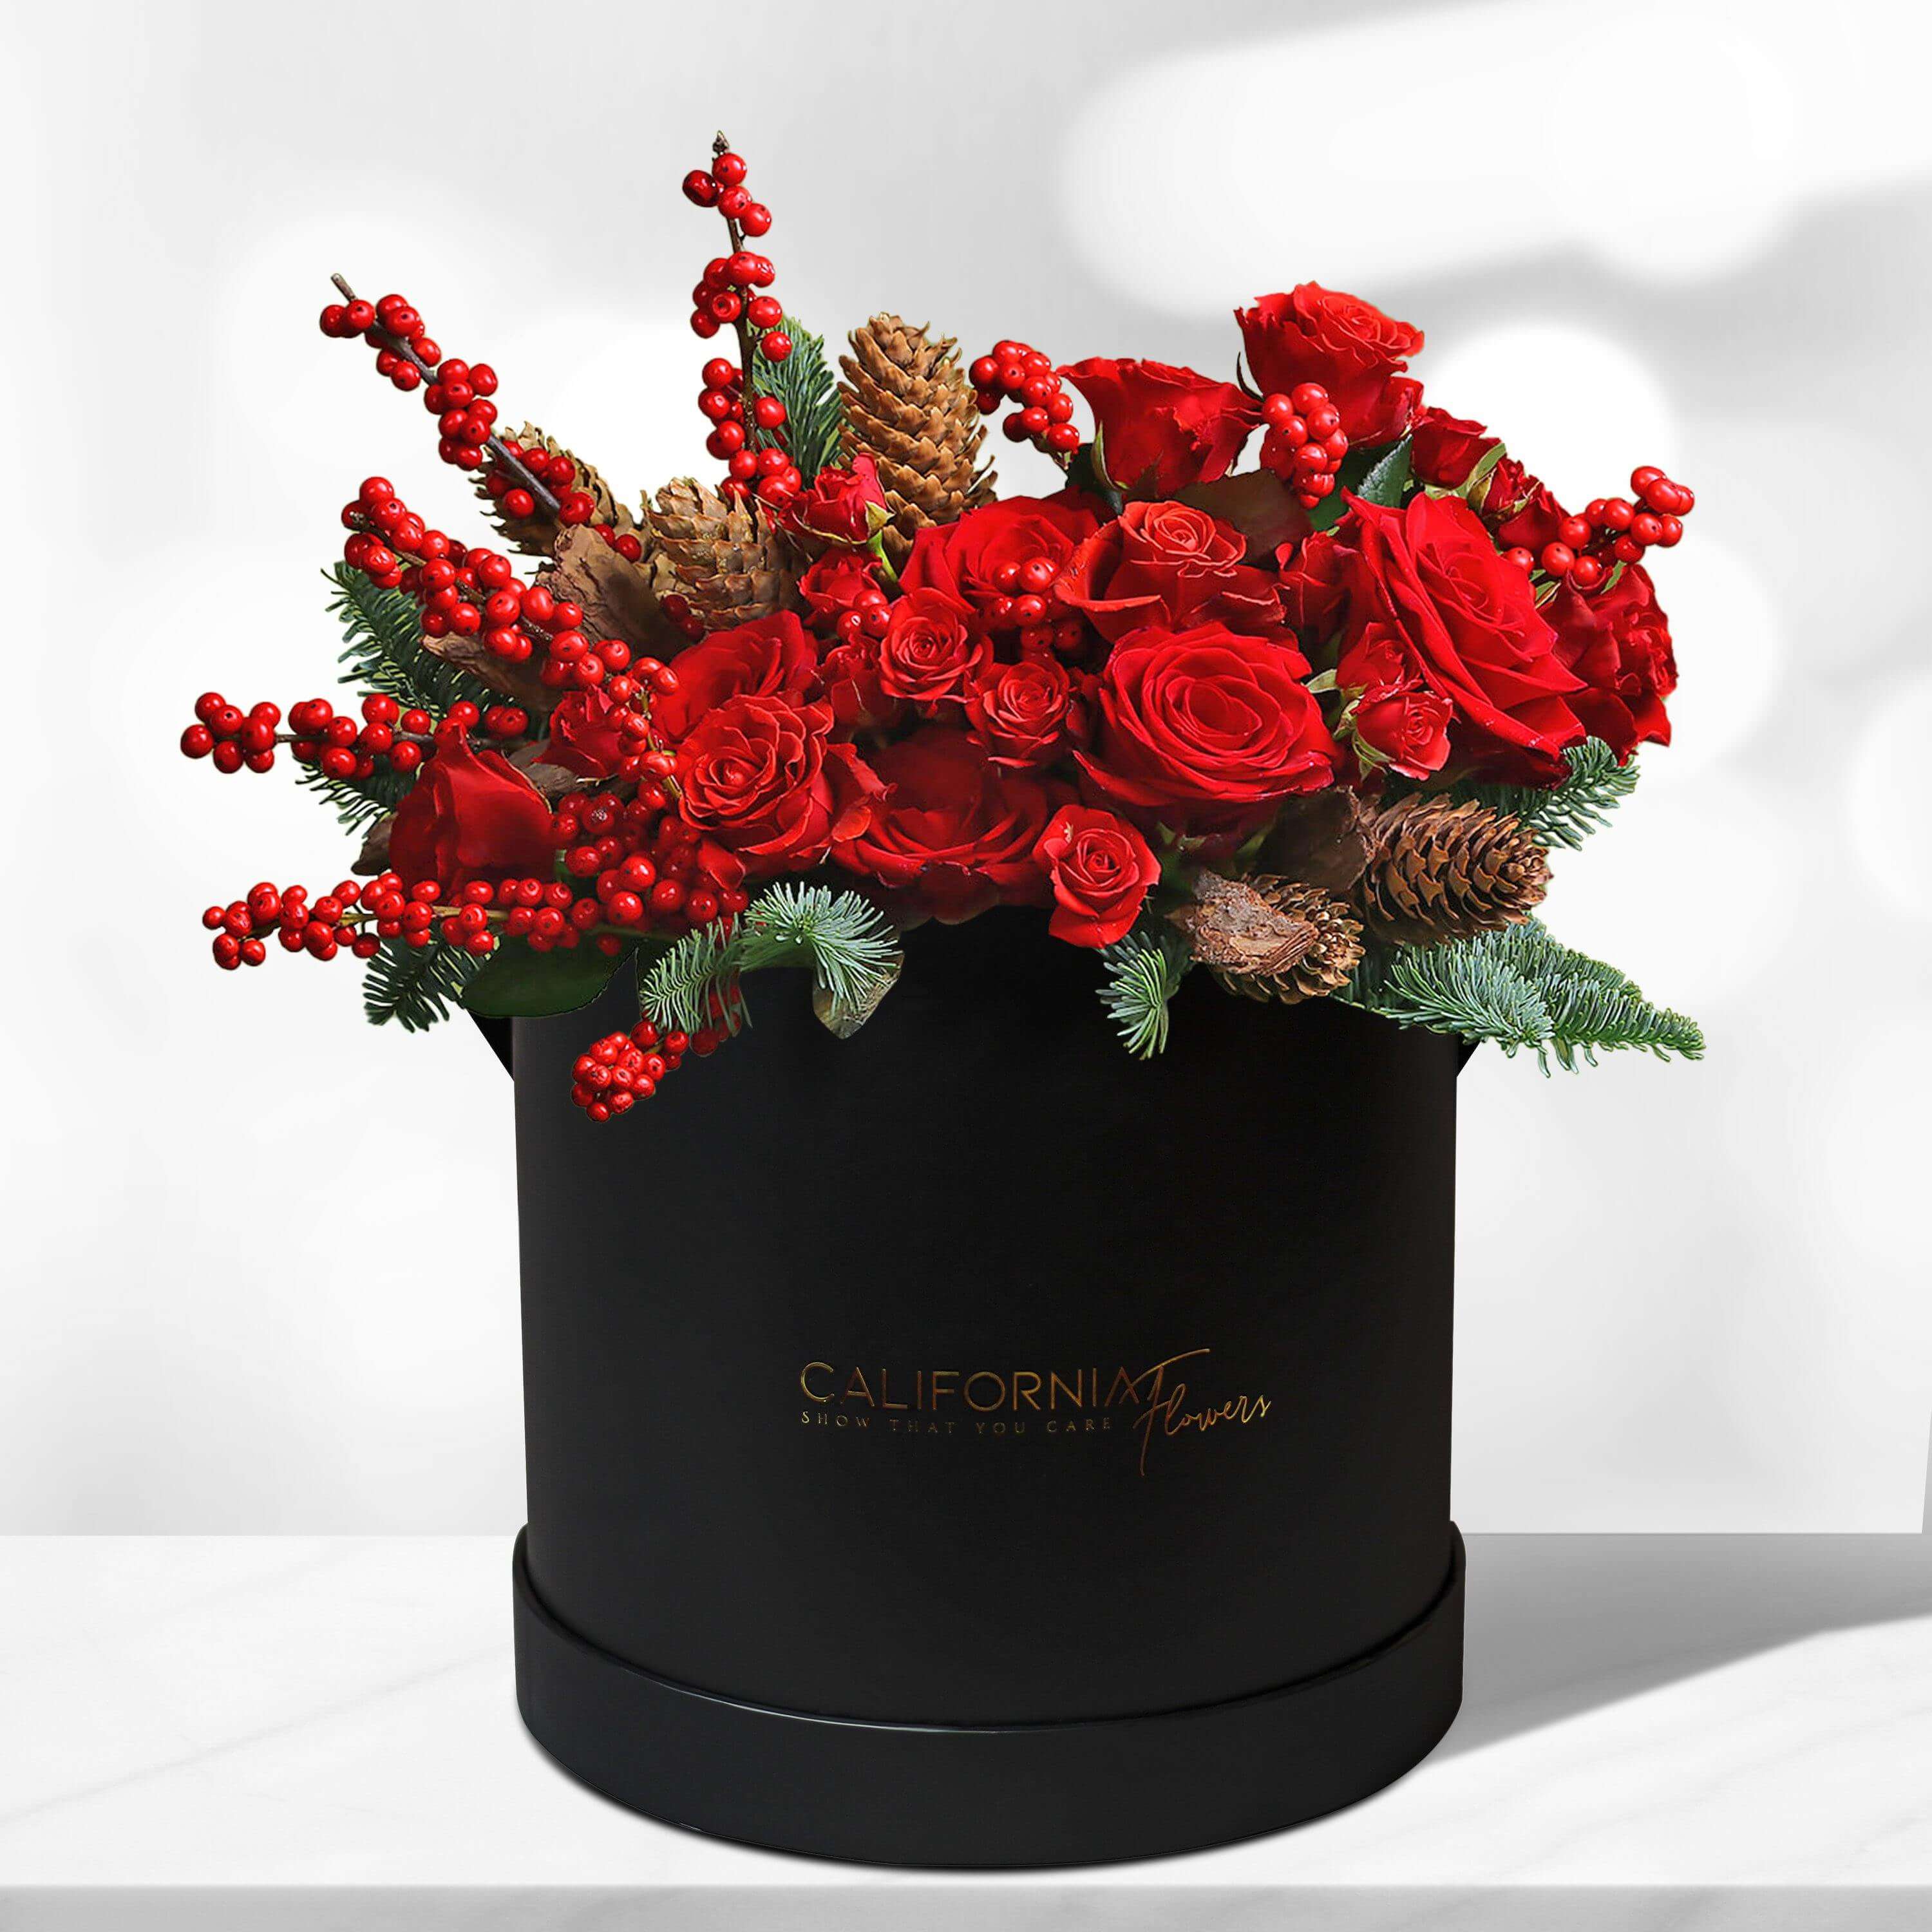 Black box with red roses and fir tree